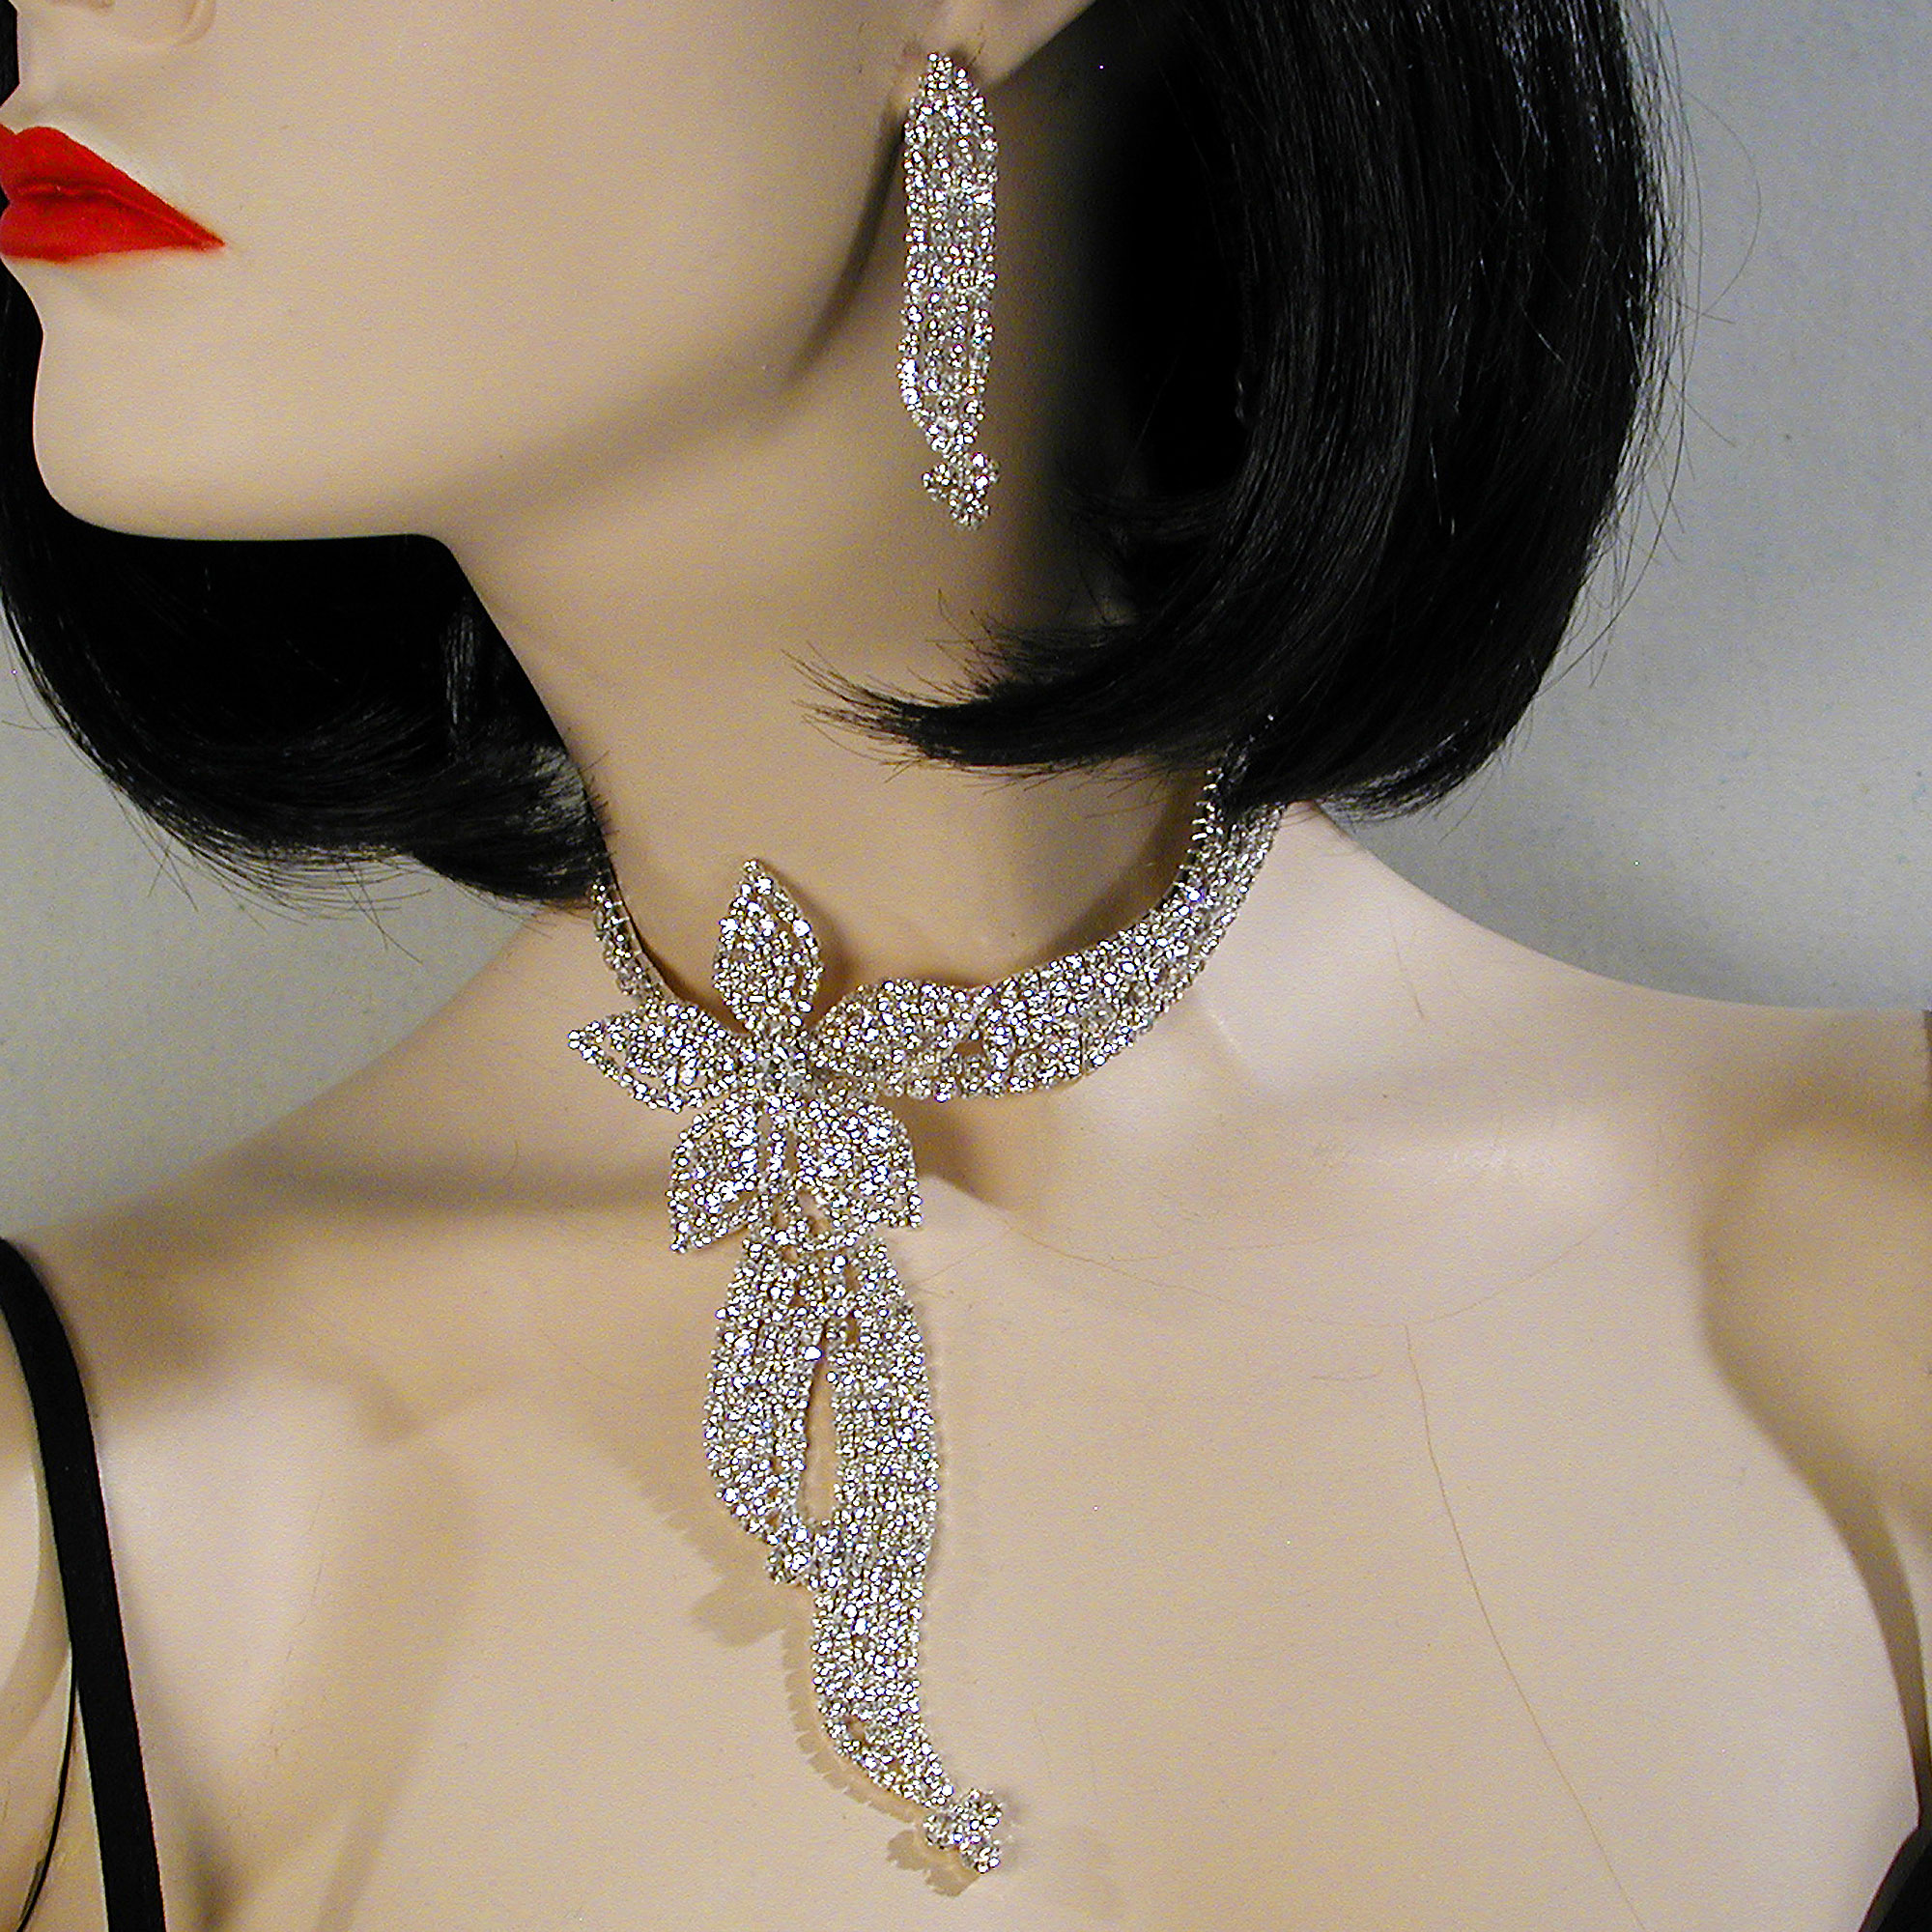 Brilliant Asymmetrical Chocker  Necklace and Earring Set, a fashion accessorie - Evening Elegance